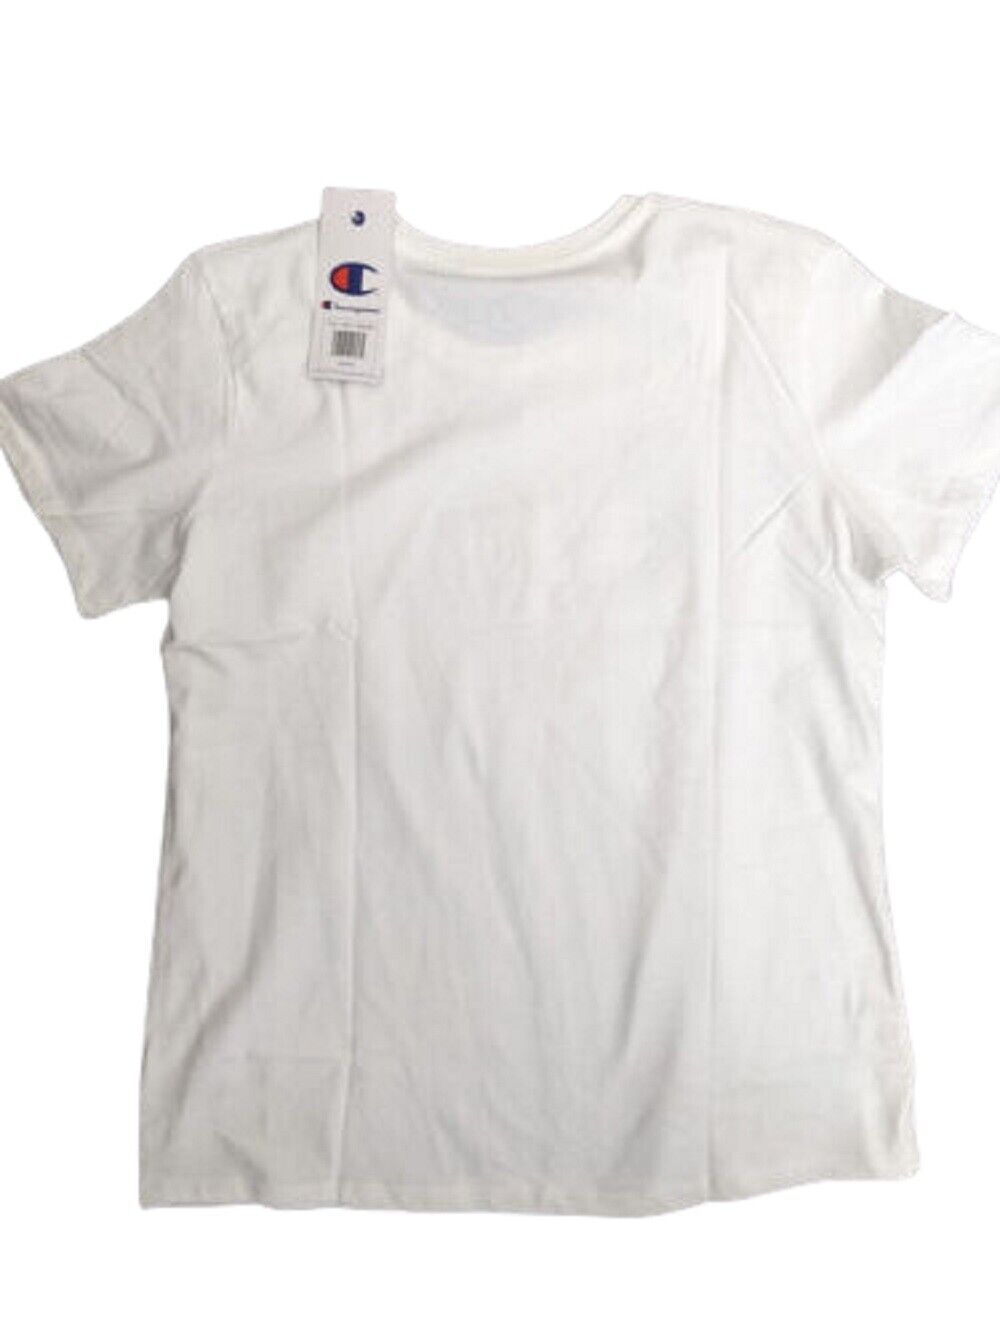 Champion Womens Sueded Tee